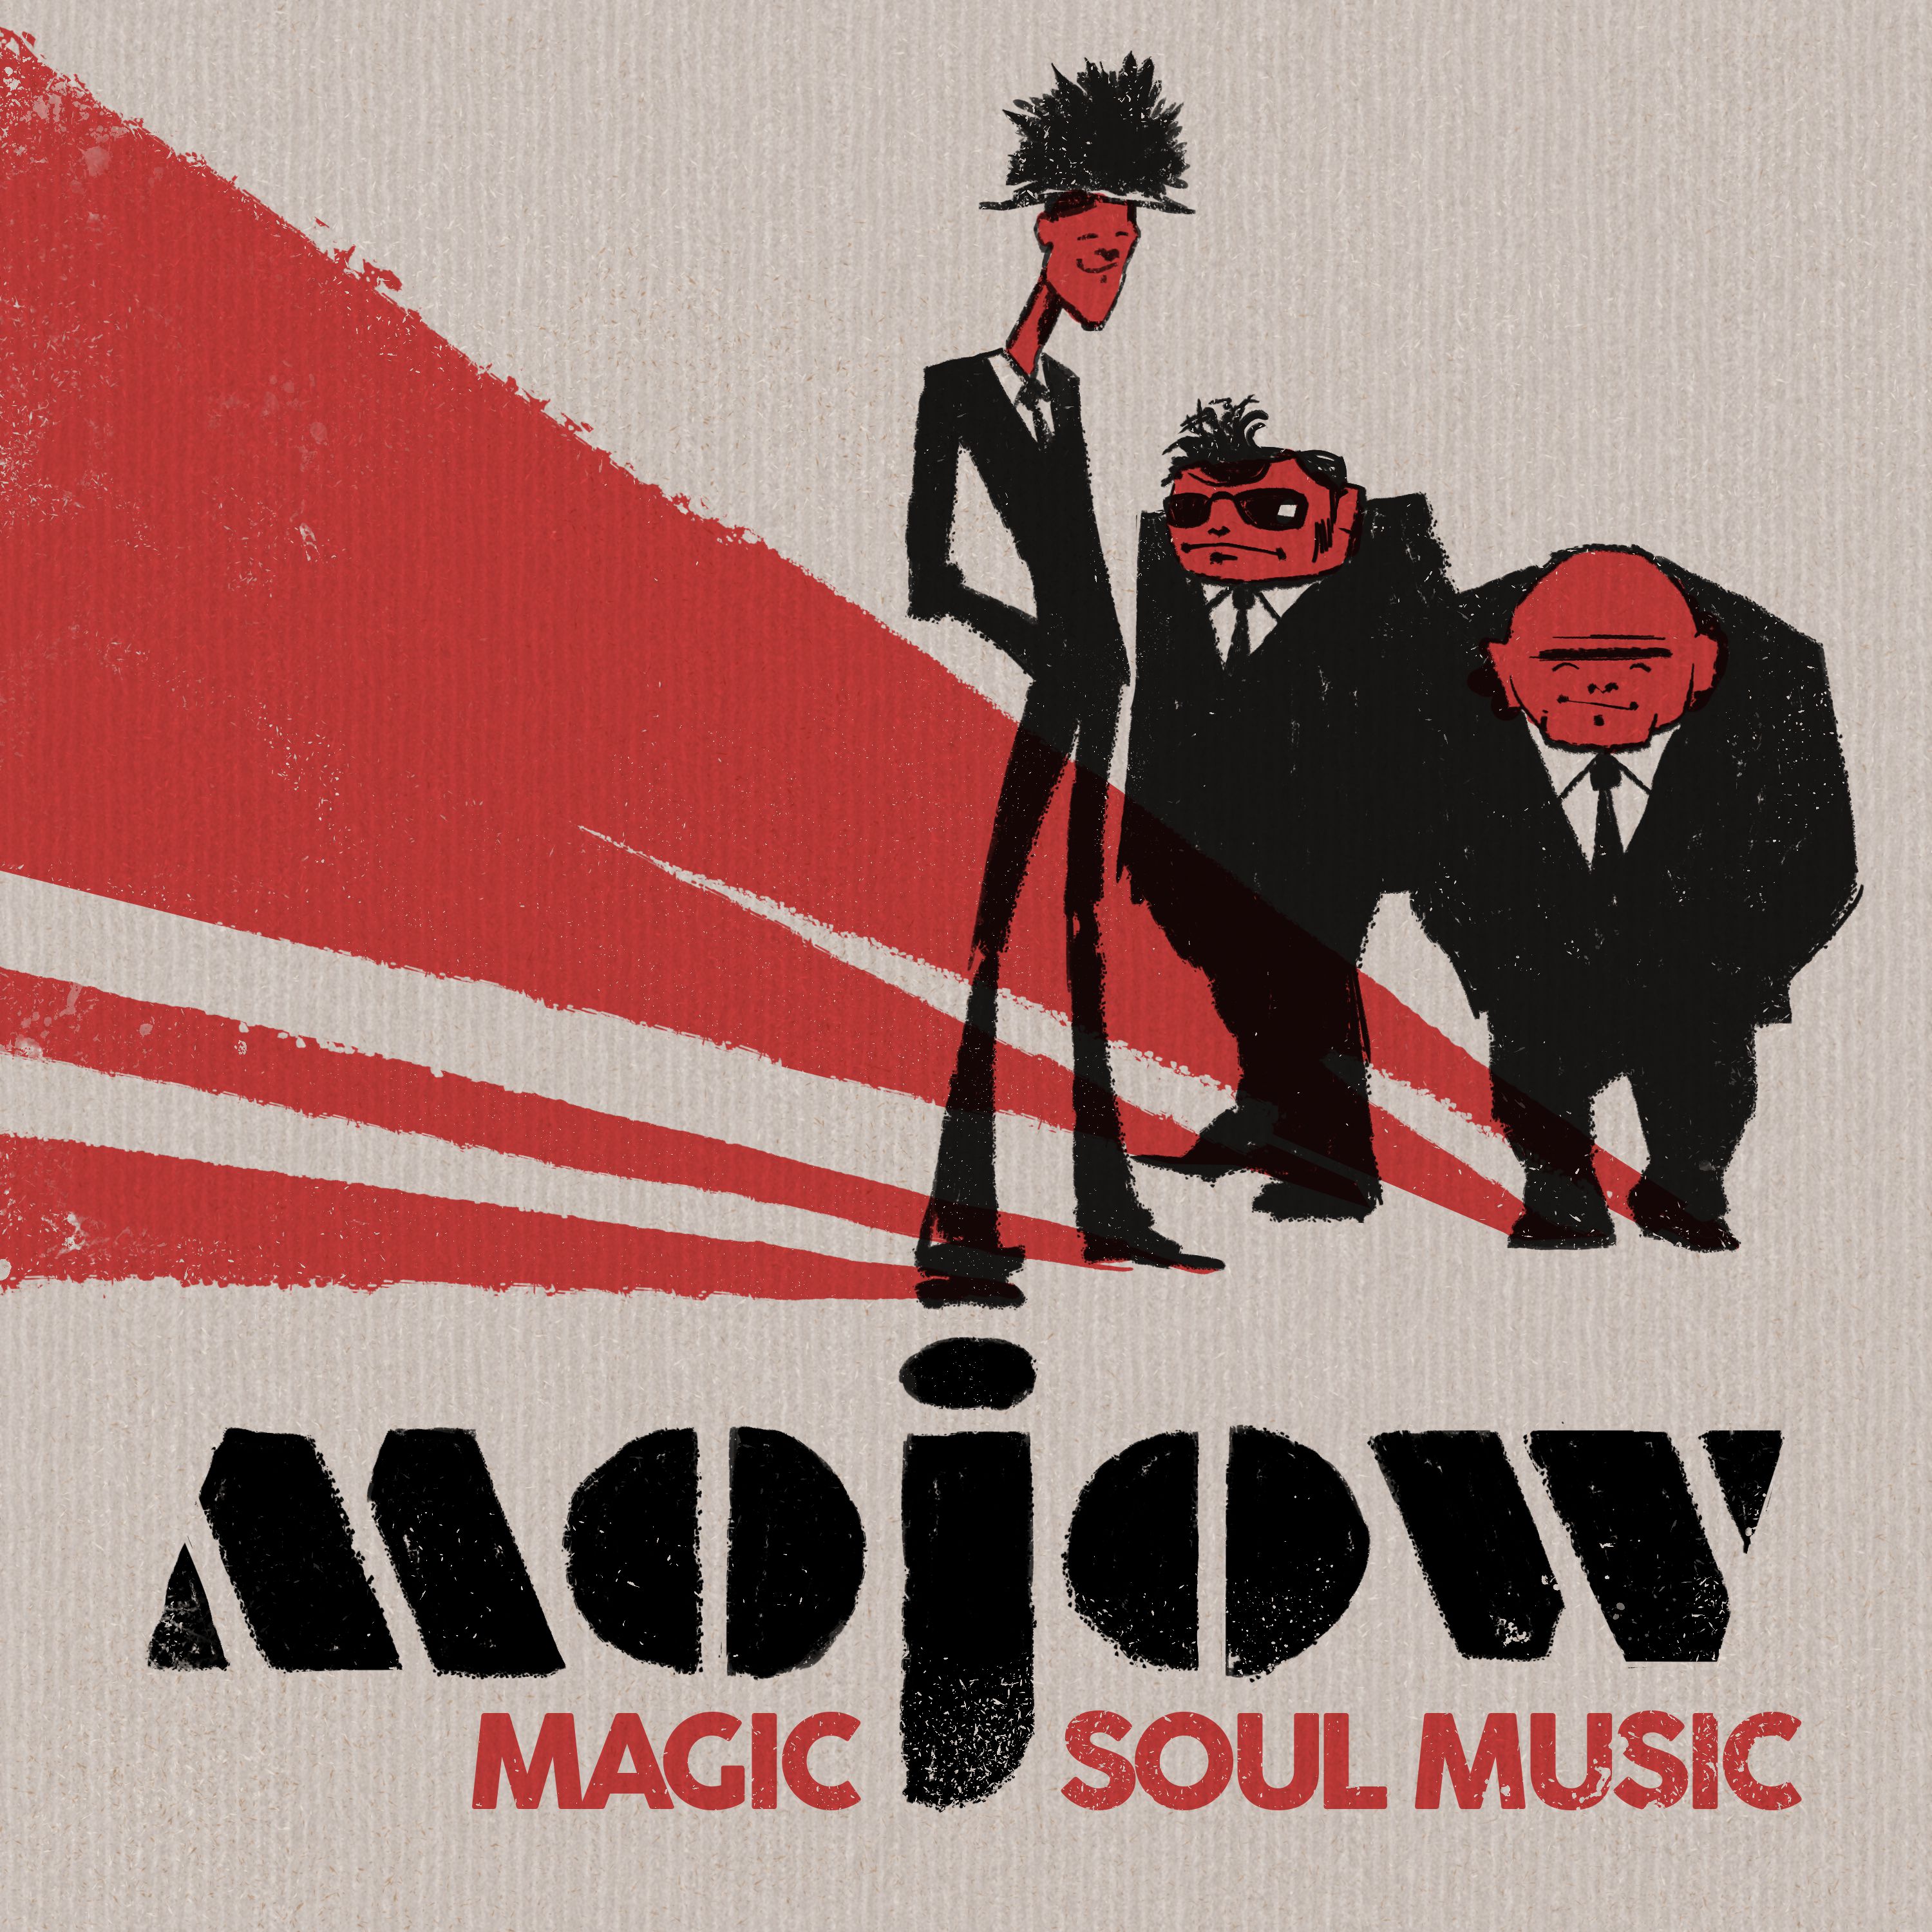 Creating Magic with Soulful and Hard-Hitting Hard Rock Soul and Funky stuff: MOJOW Stuns with Magnetizing New EP